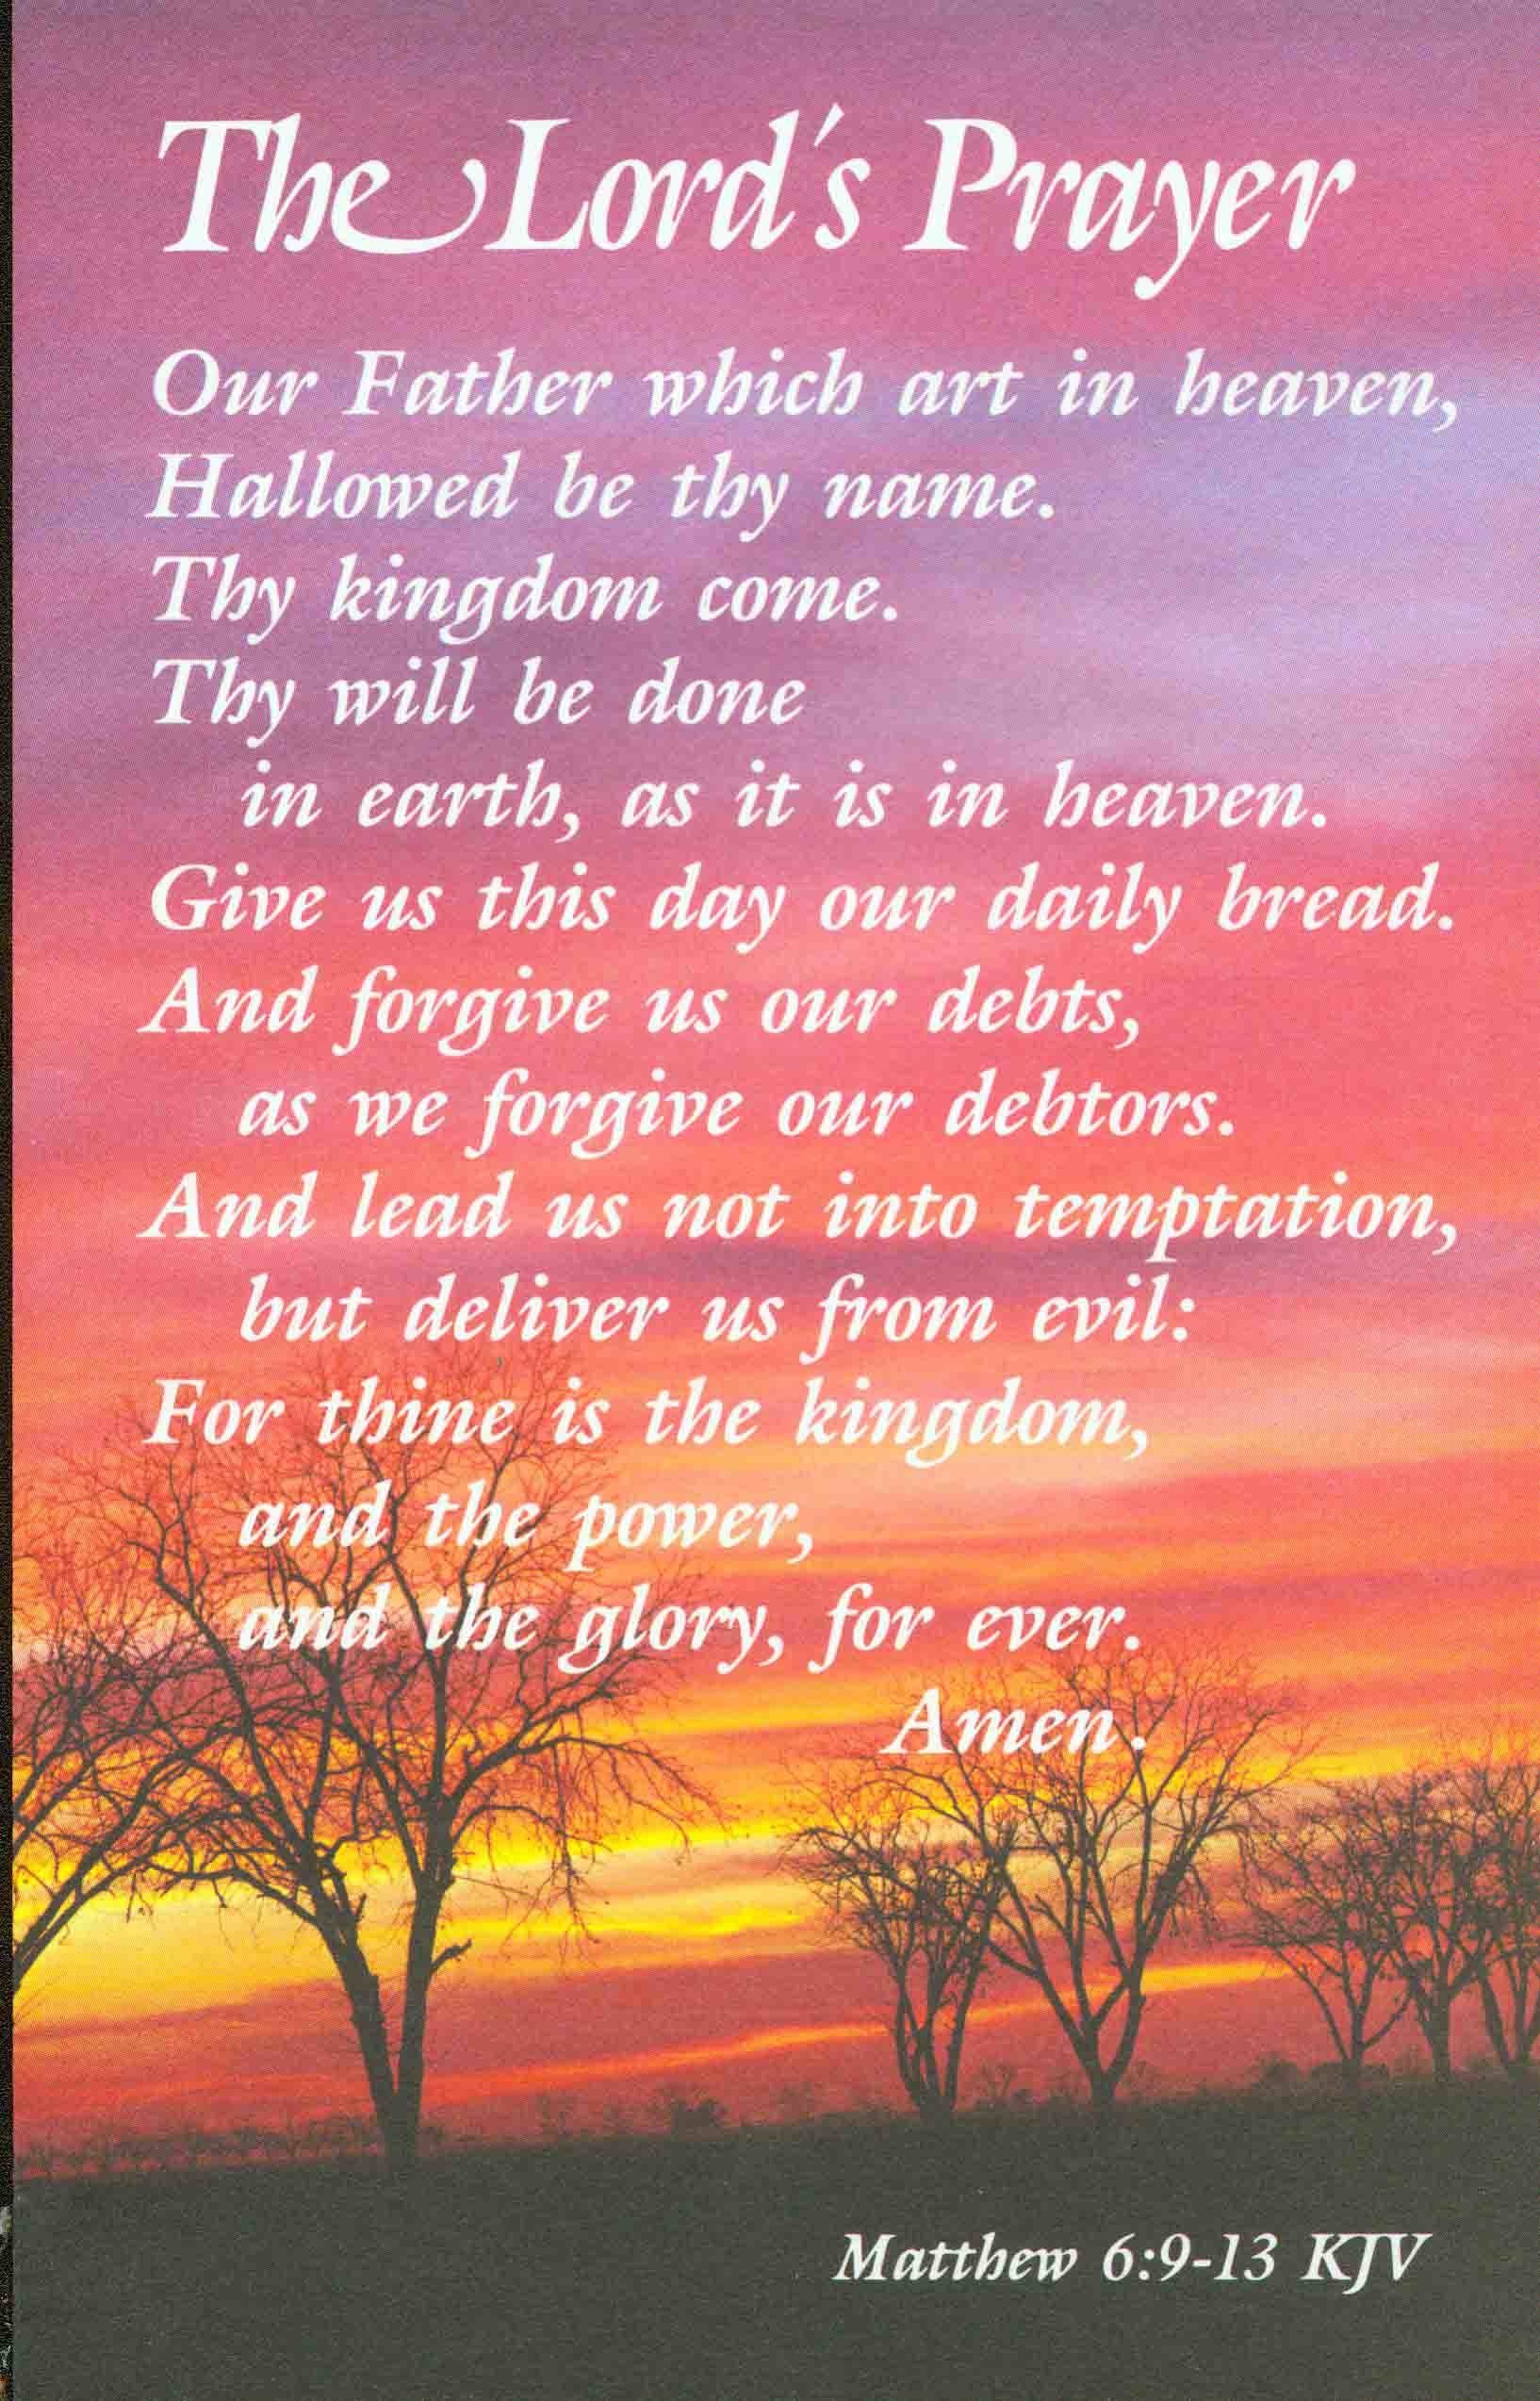 The Lords Prayer Wallpaper (69+ images)